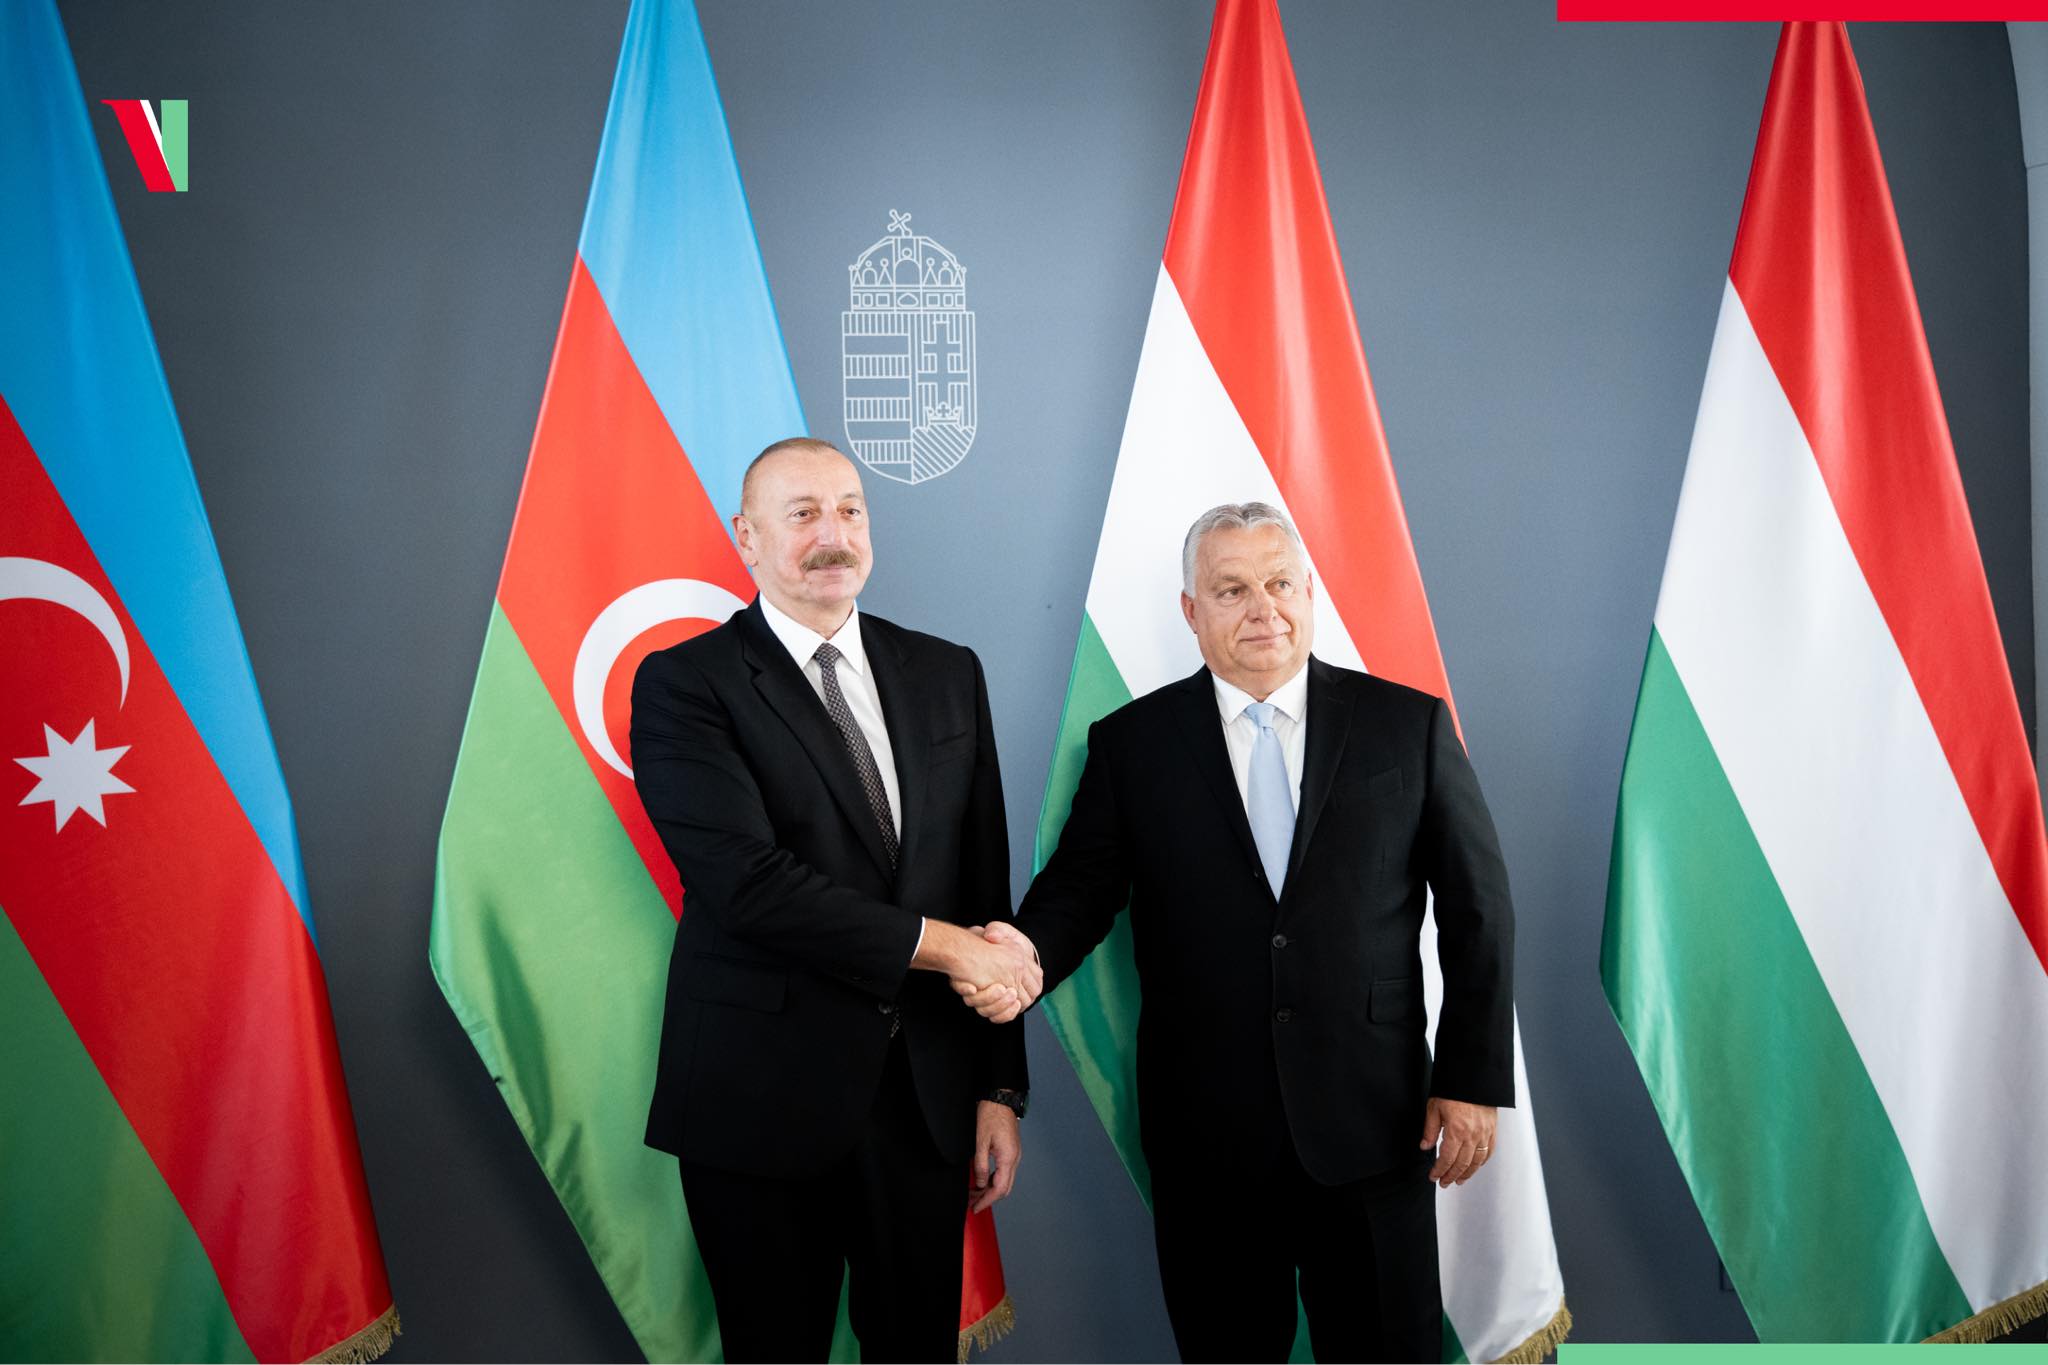 Watch: Orbán Hosts Erdogan & Other Eastern Leaders on Hungary's National Day